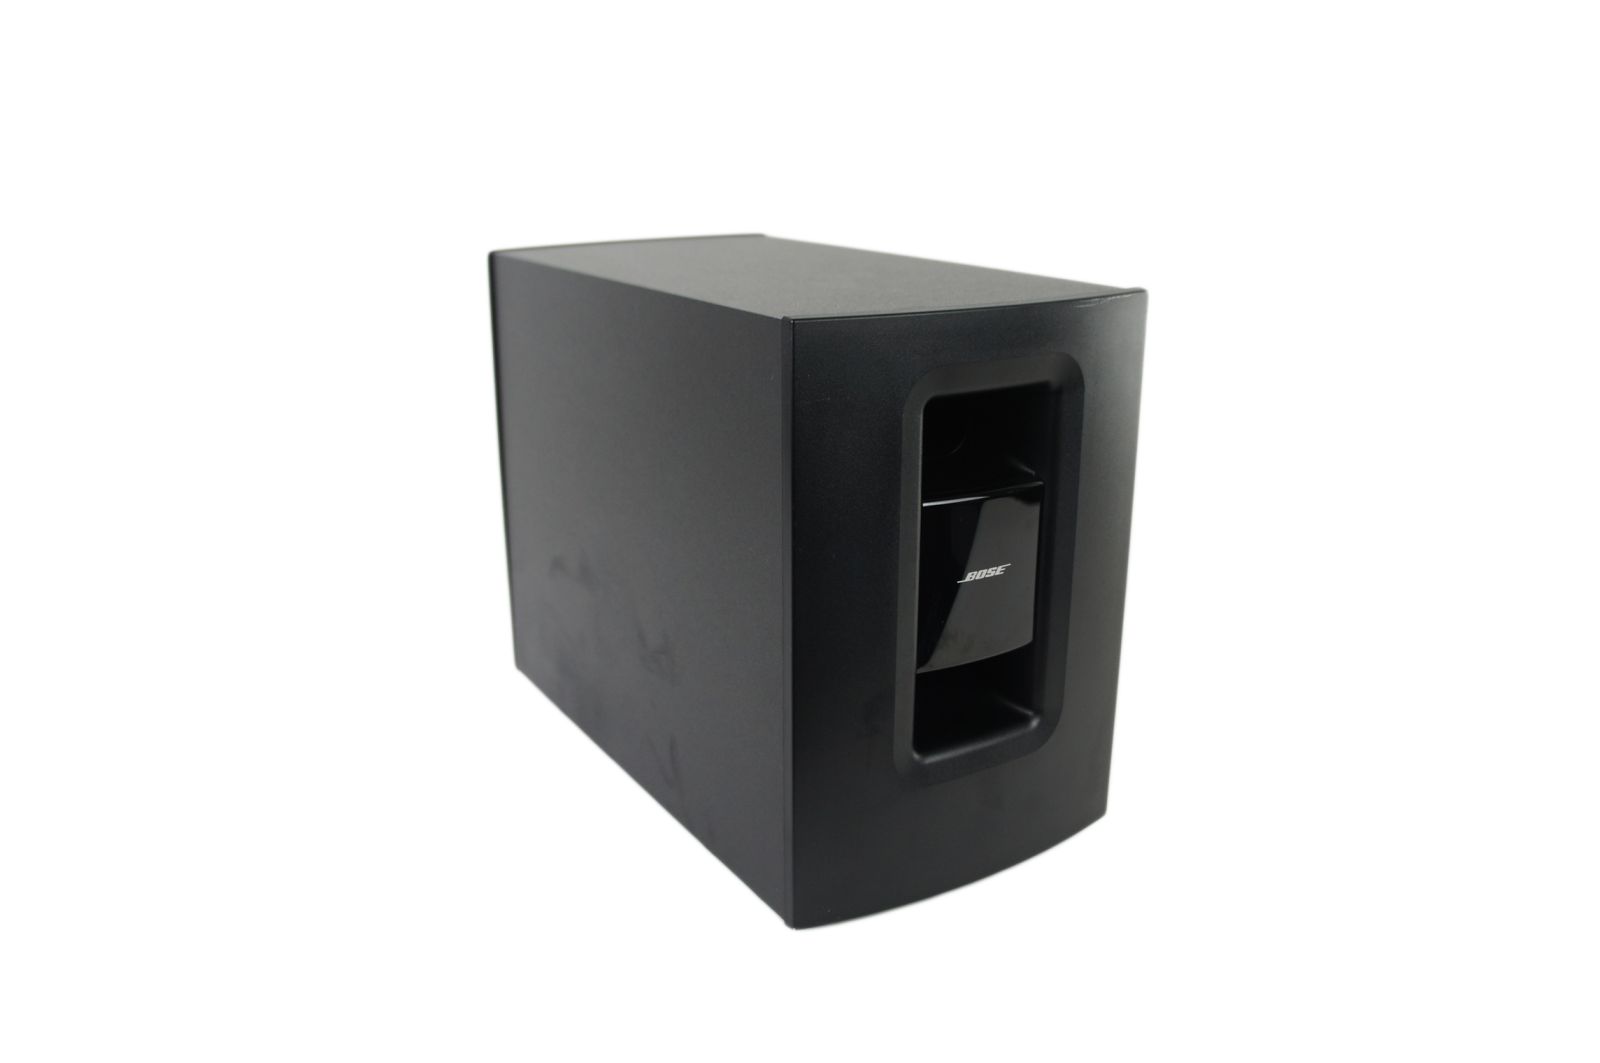 BOSE_SoundTouch_220_2.1_Heimkino-System_03